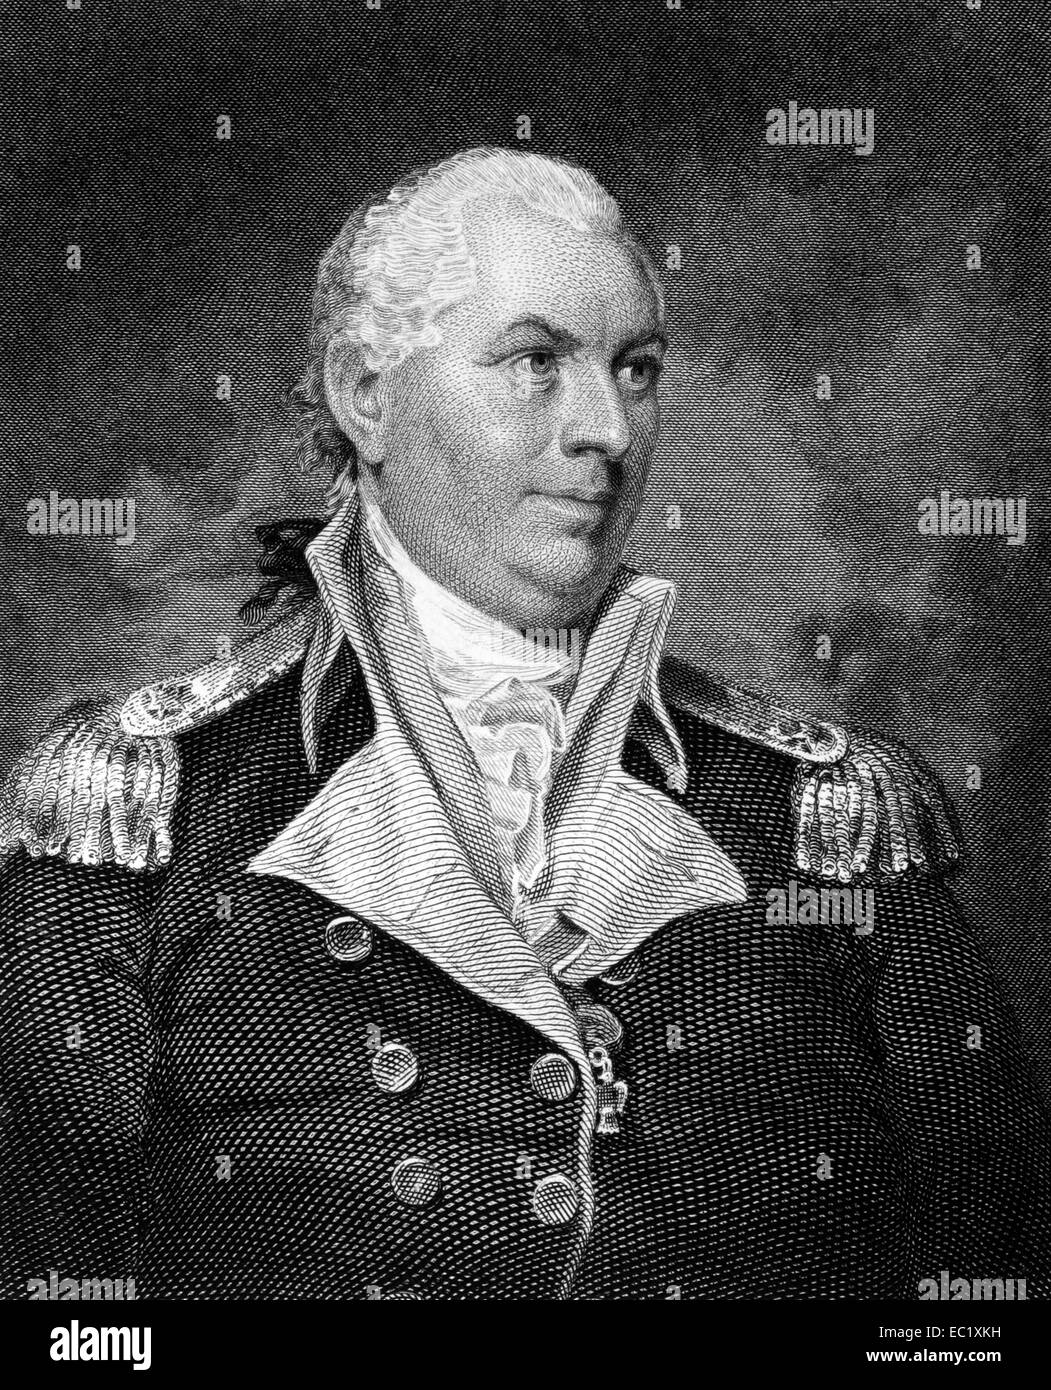 John Barry (1745-1803) on engraving from 1835. Officer in the Continental Navy during the American Revolutionary War. Stock Photo